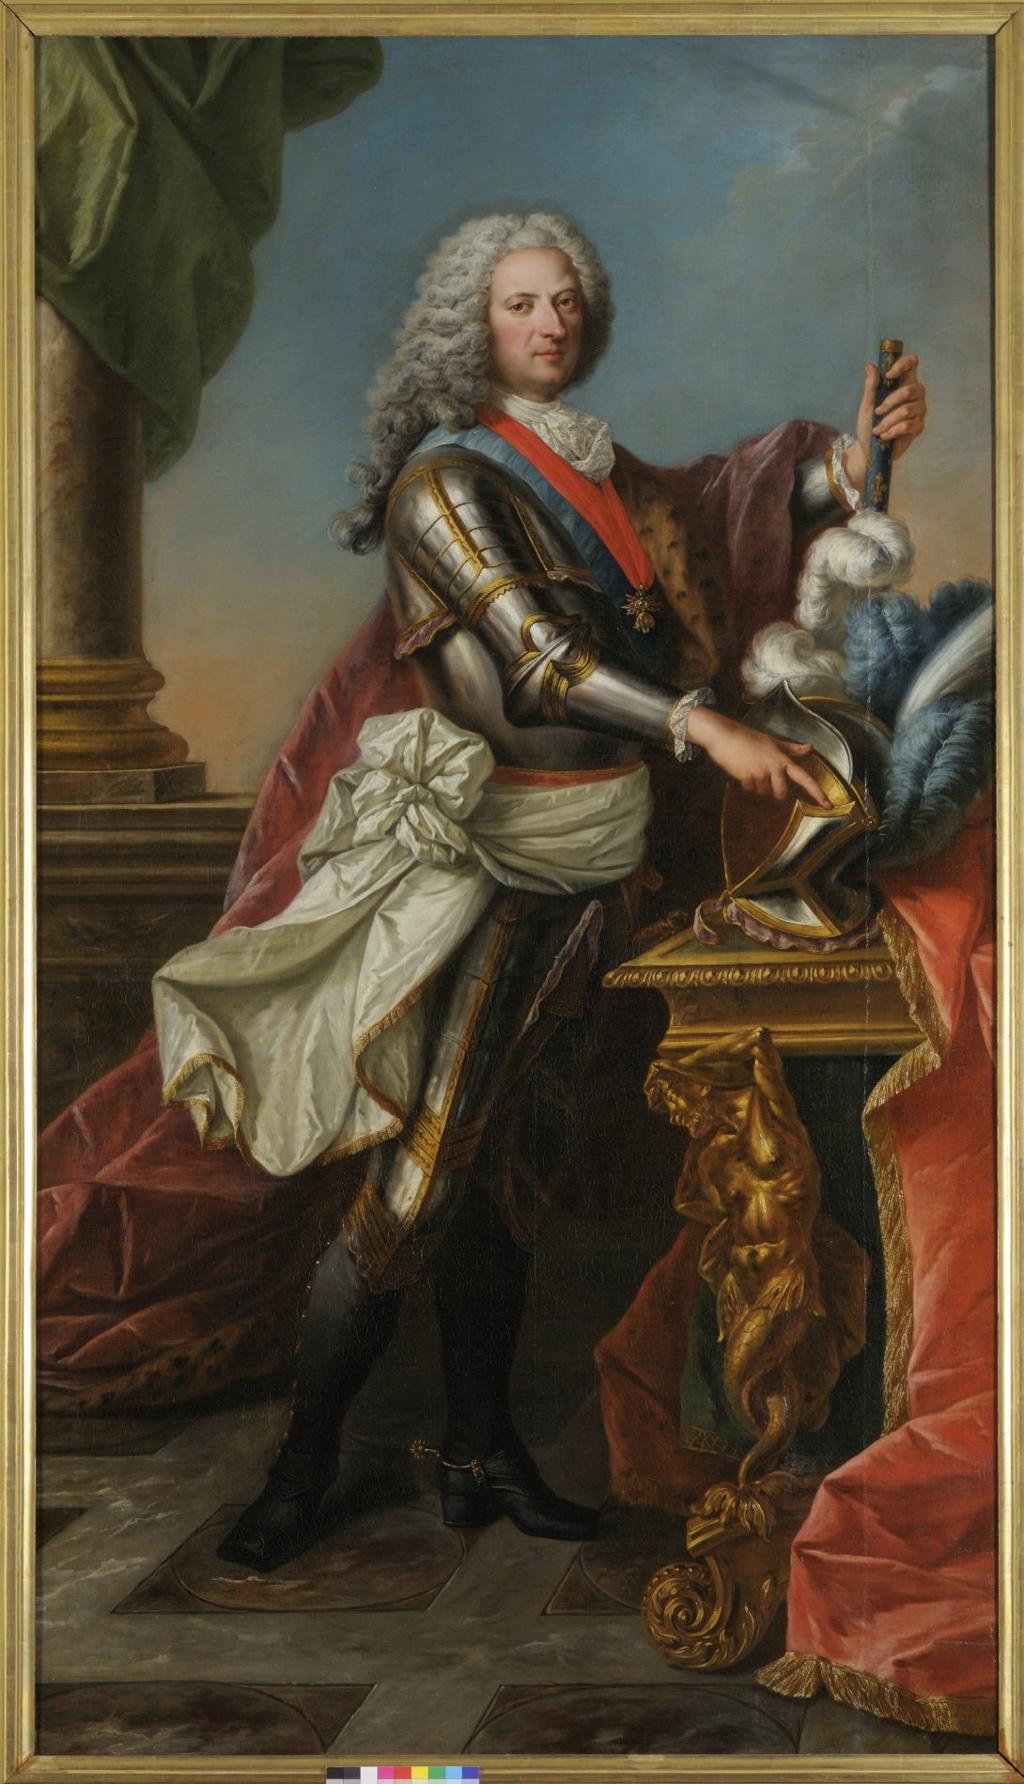 Philippe II, duc d'Orleans, Facts & Biography